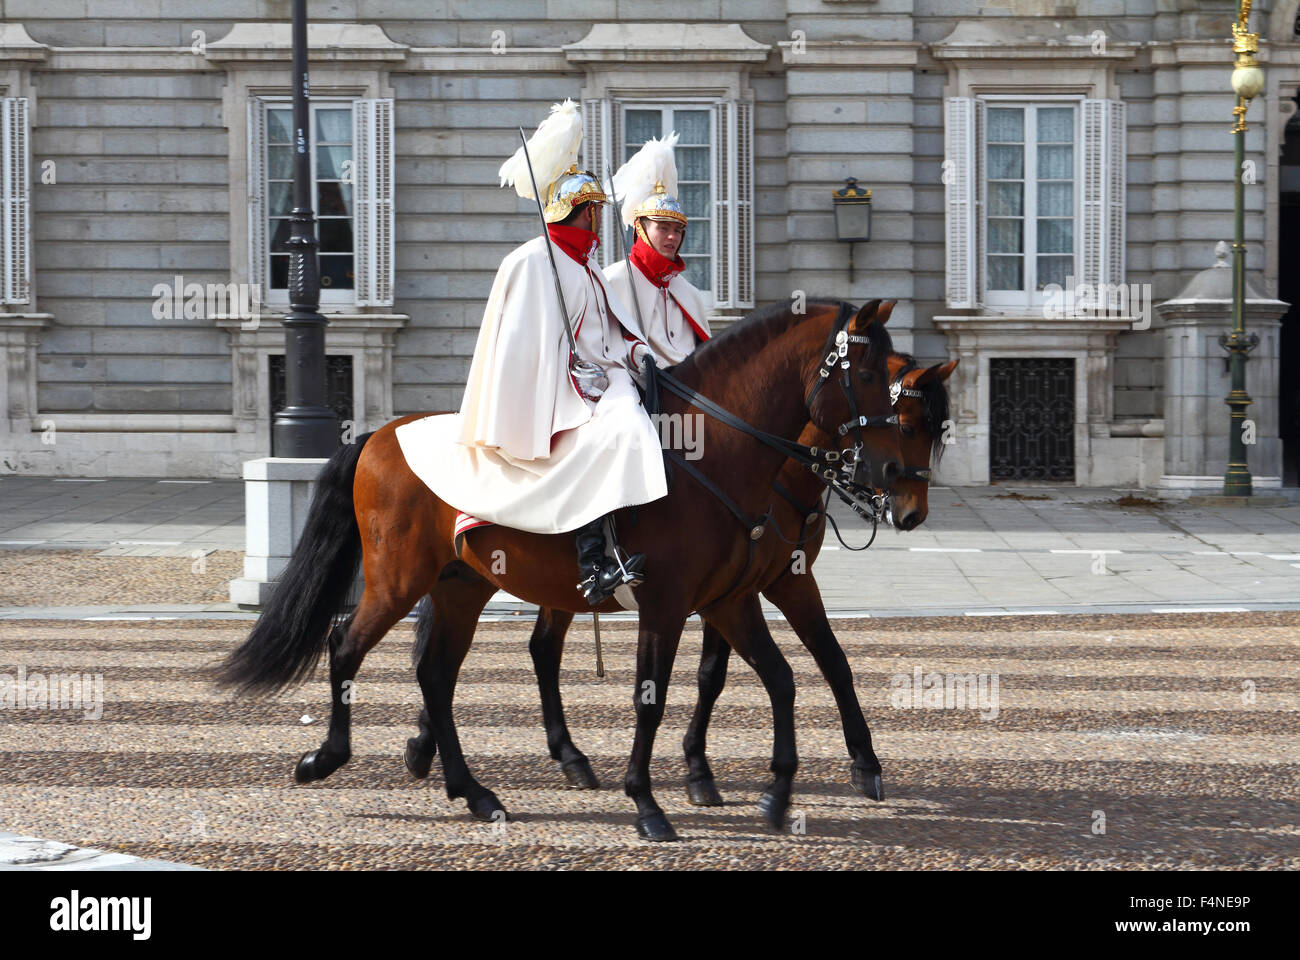 Spanish Royal Guard on horses, in front of the Royal Palace Stock Photo